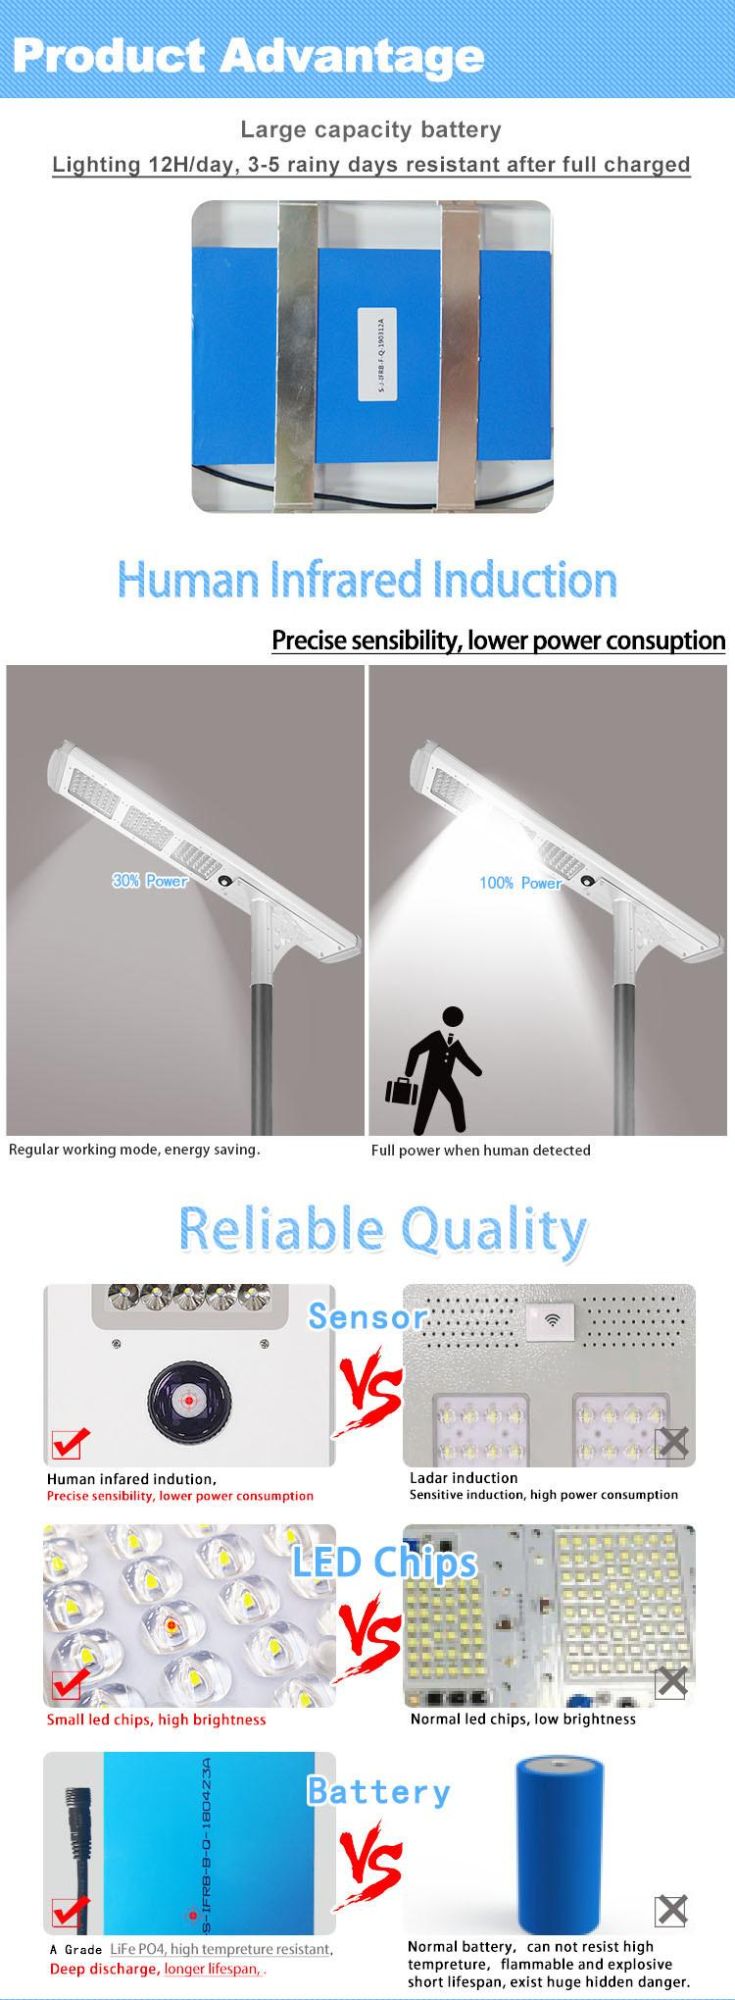 Intelligence Solar Street Light Battery Powered for Widely Application